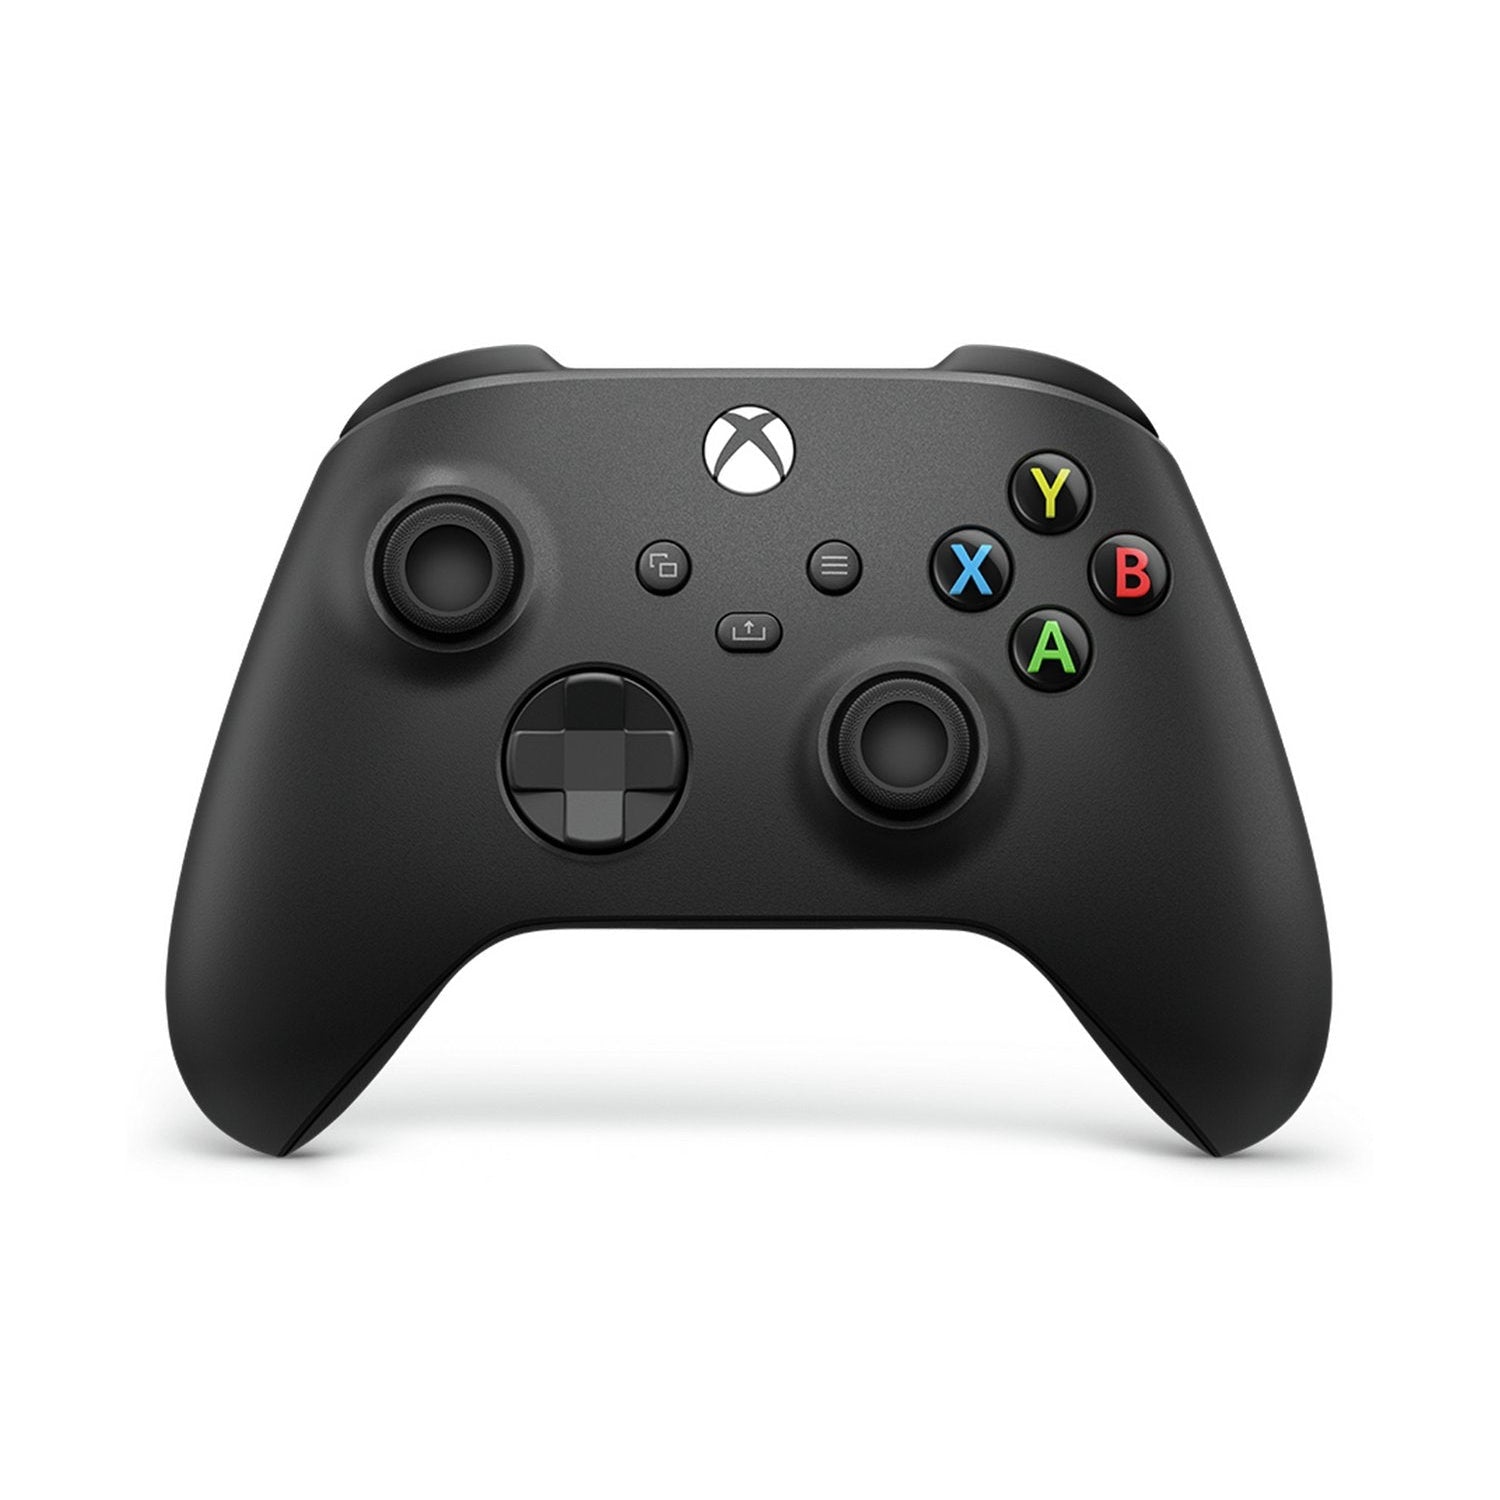 Microsoft Xbox Series X/S Wireless Controller - Carbon Black - Refurbished Excellent